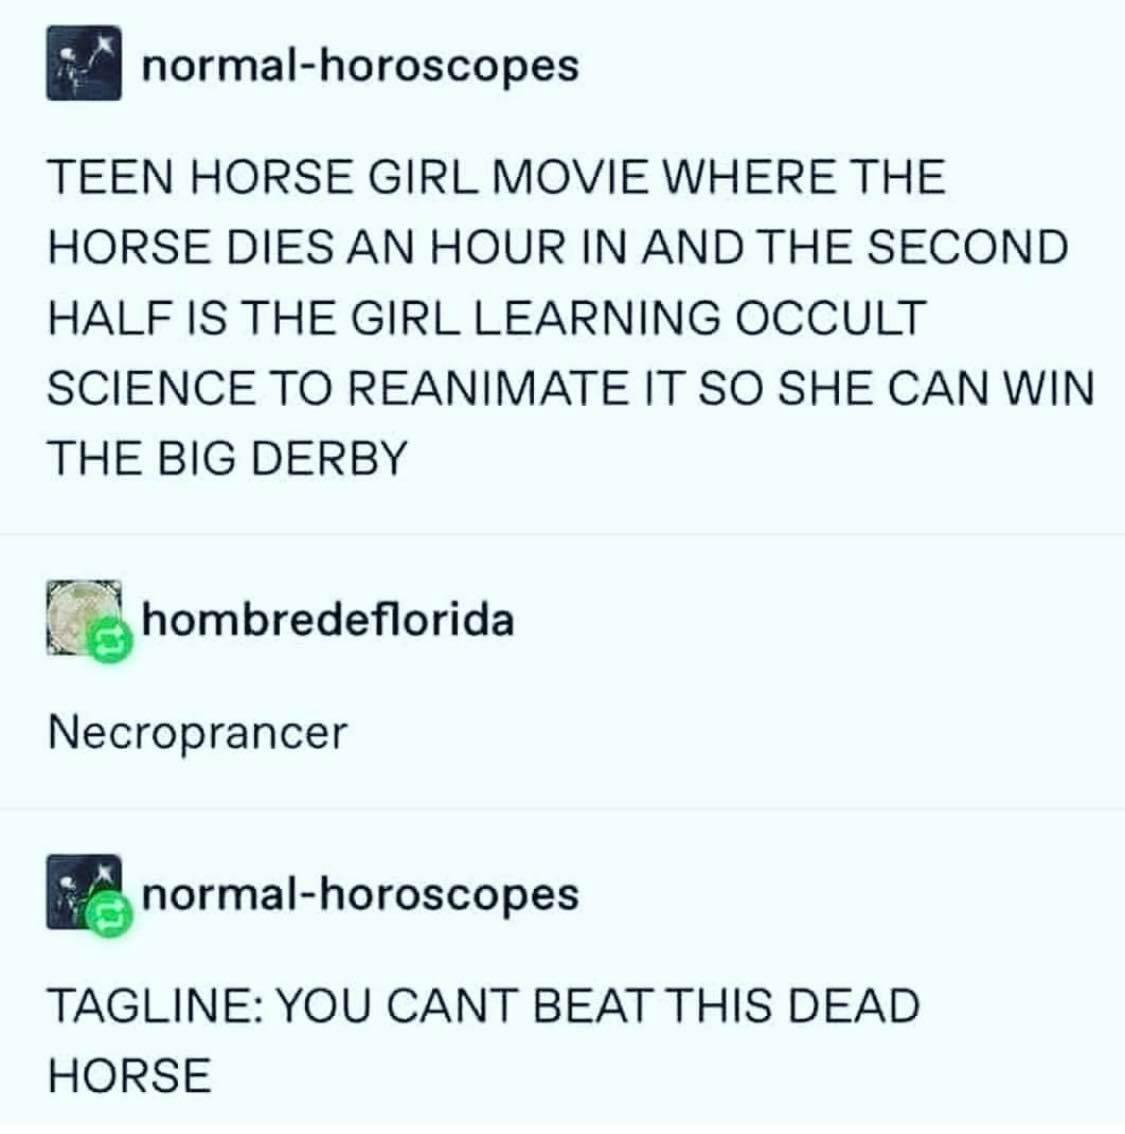 funny pics and randoms  - necroprancer meme - normalhoroscopes Teen Horse Girl Movie Where The Horse Dies An Hour In And The Second Half Is The Girl Learning Occult Science To Reanimate It So She Can Win The Big Derby hombredeflorida Necroprancer normalho